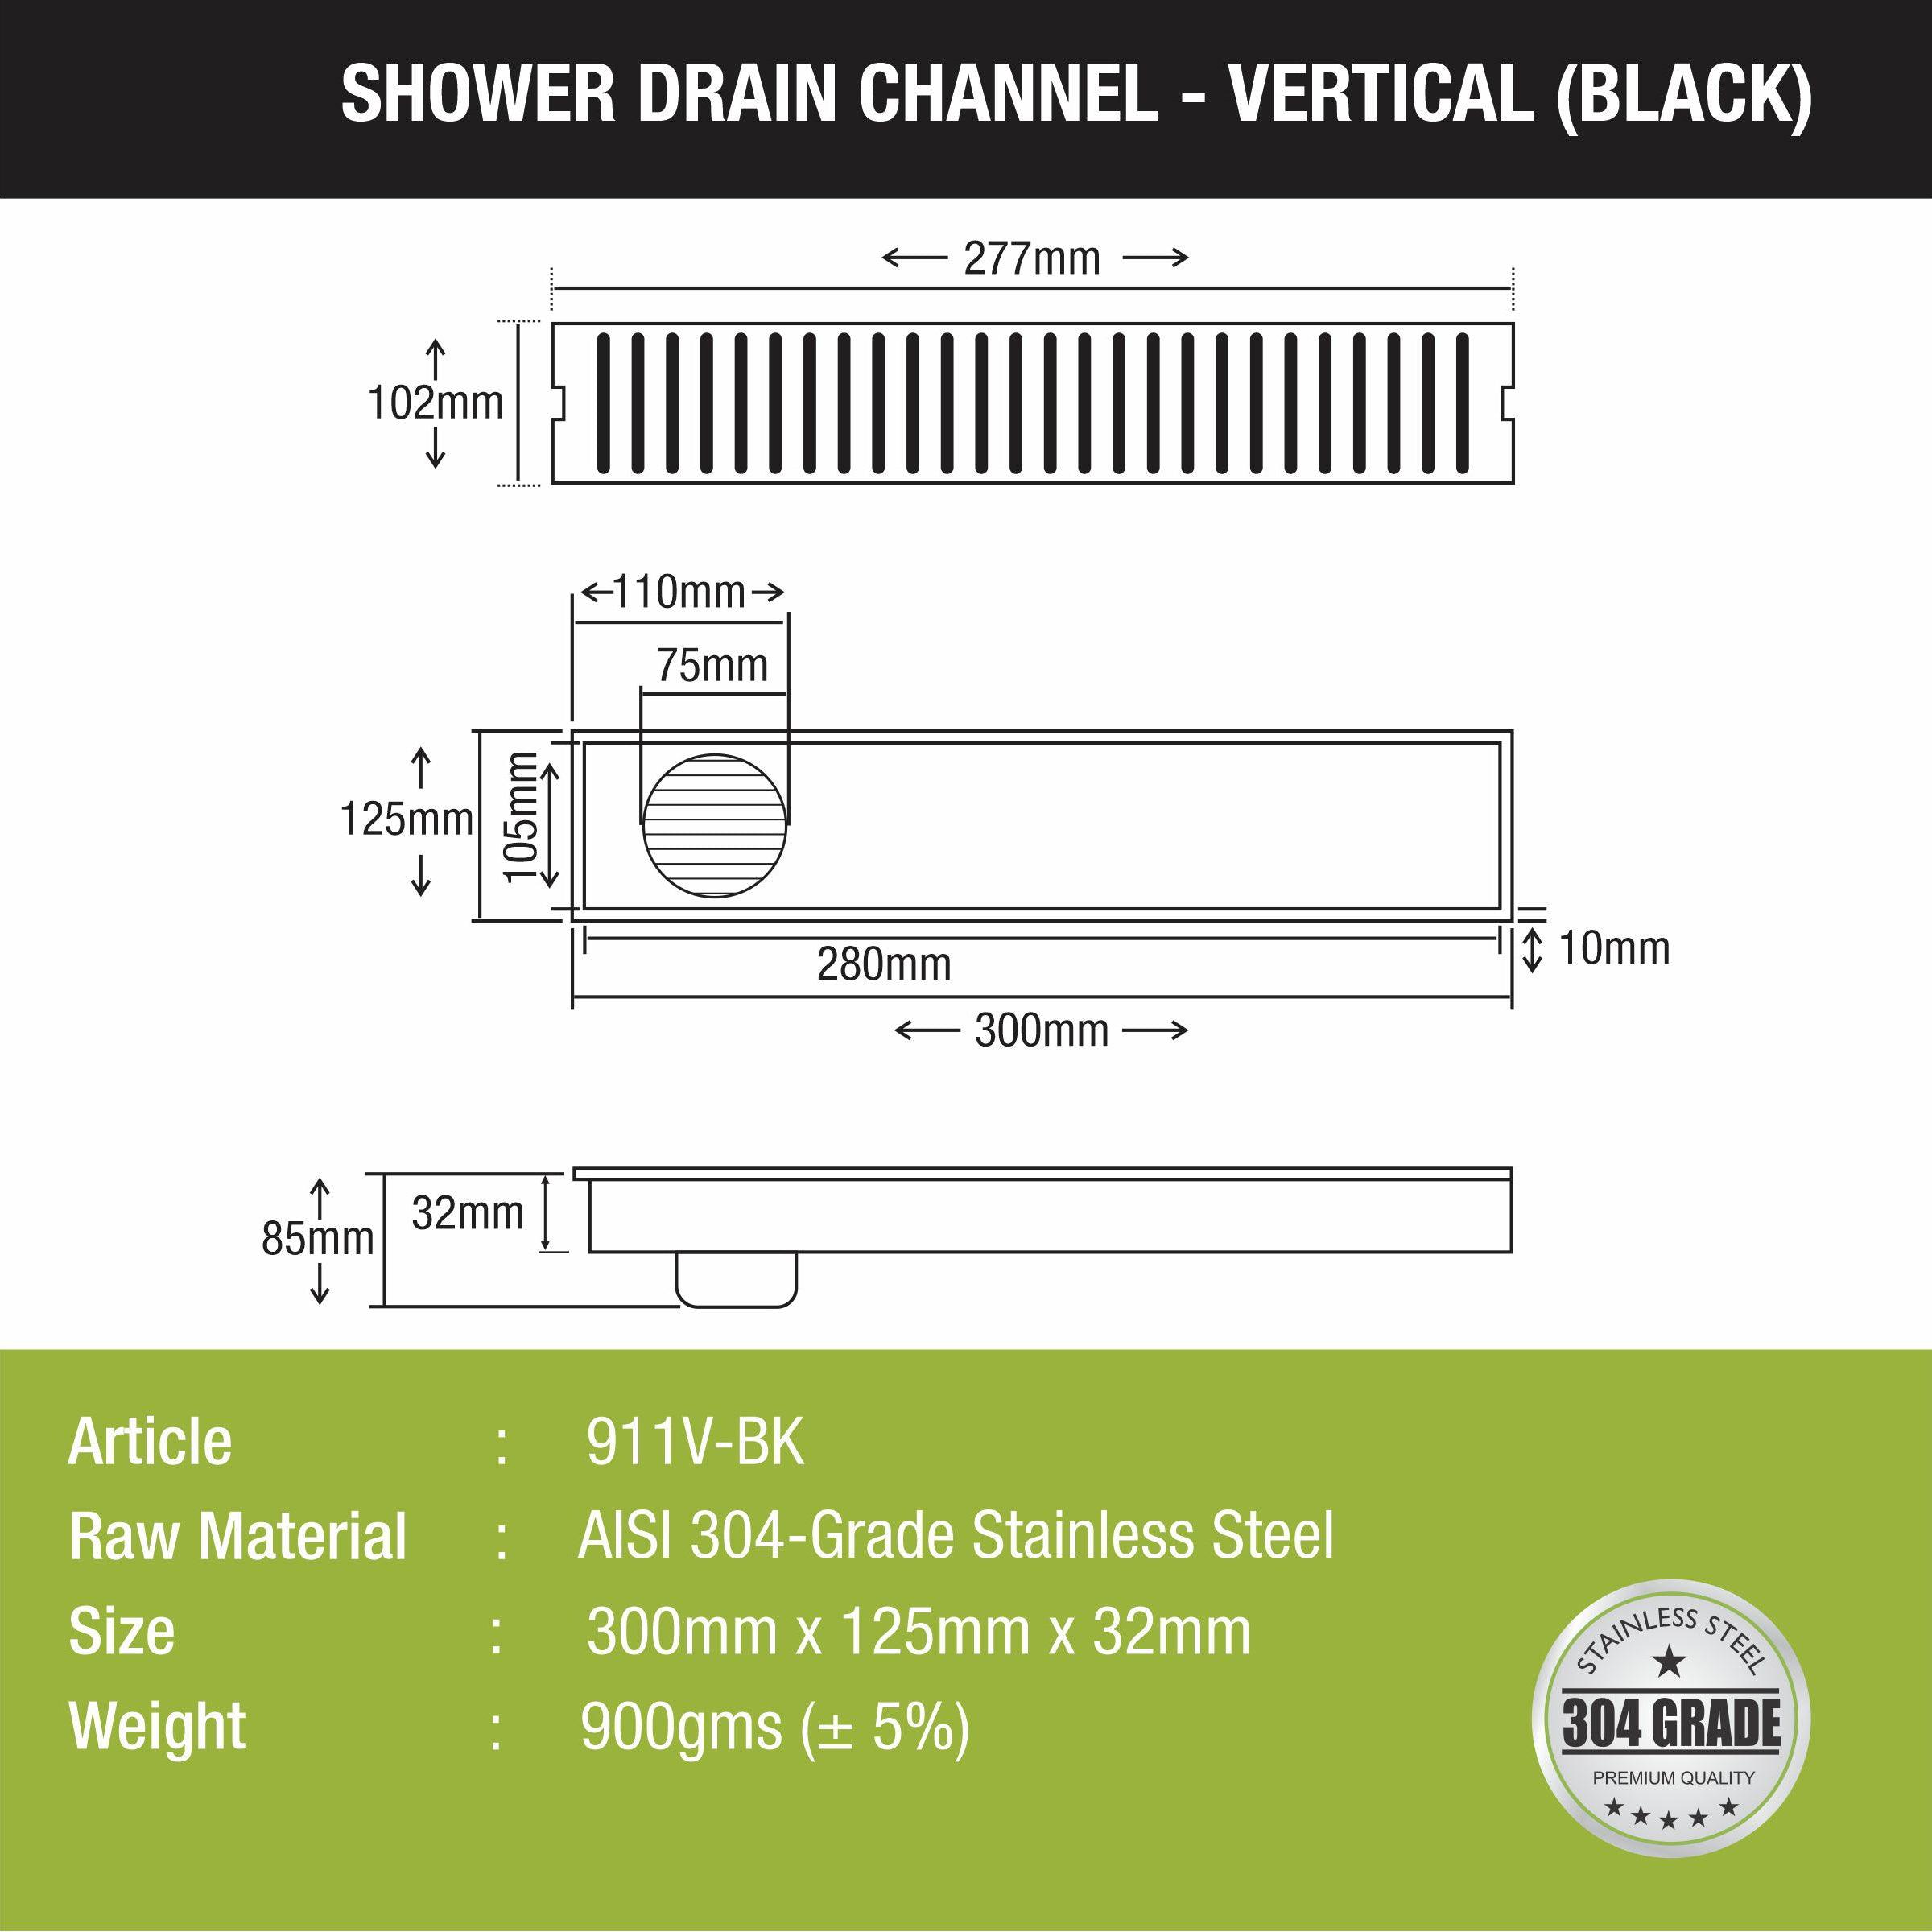 Vertical Shower Drain Channel - Black (12 x 5 Inches) size and measuerrement